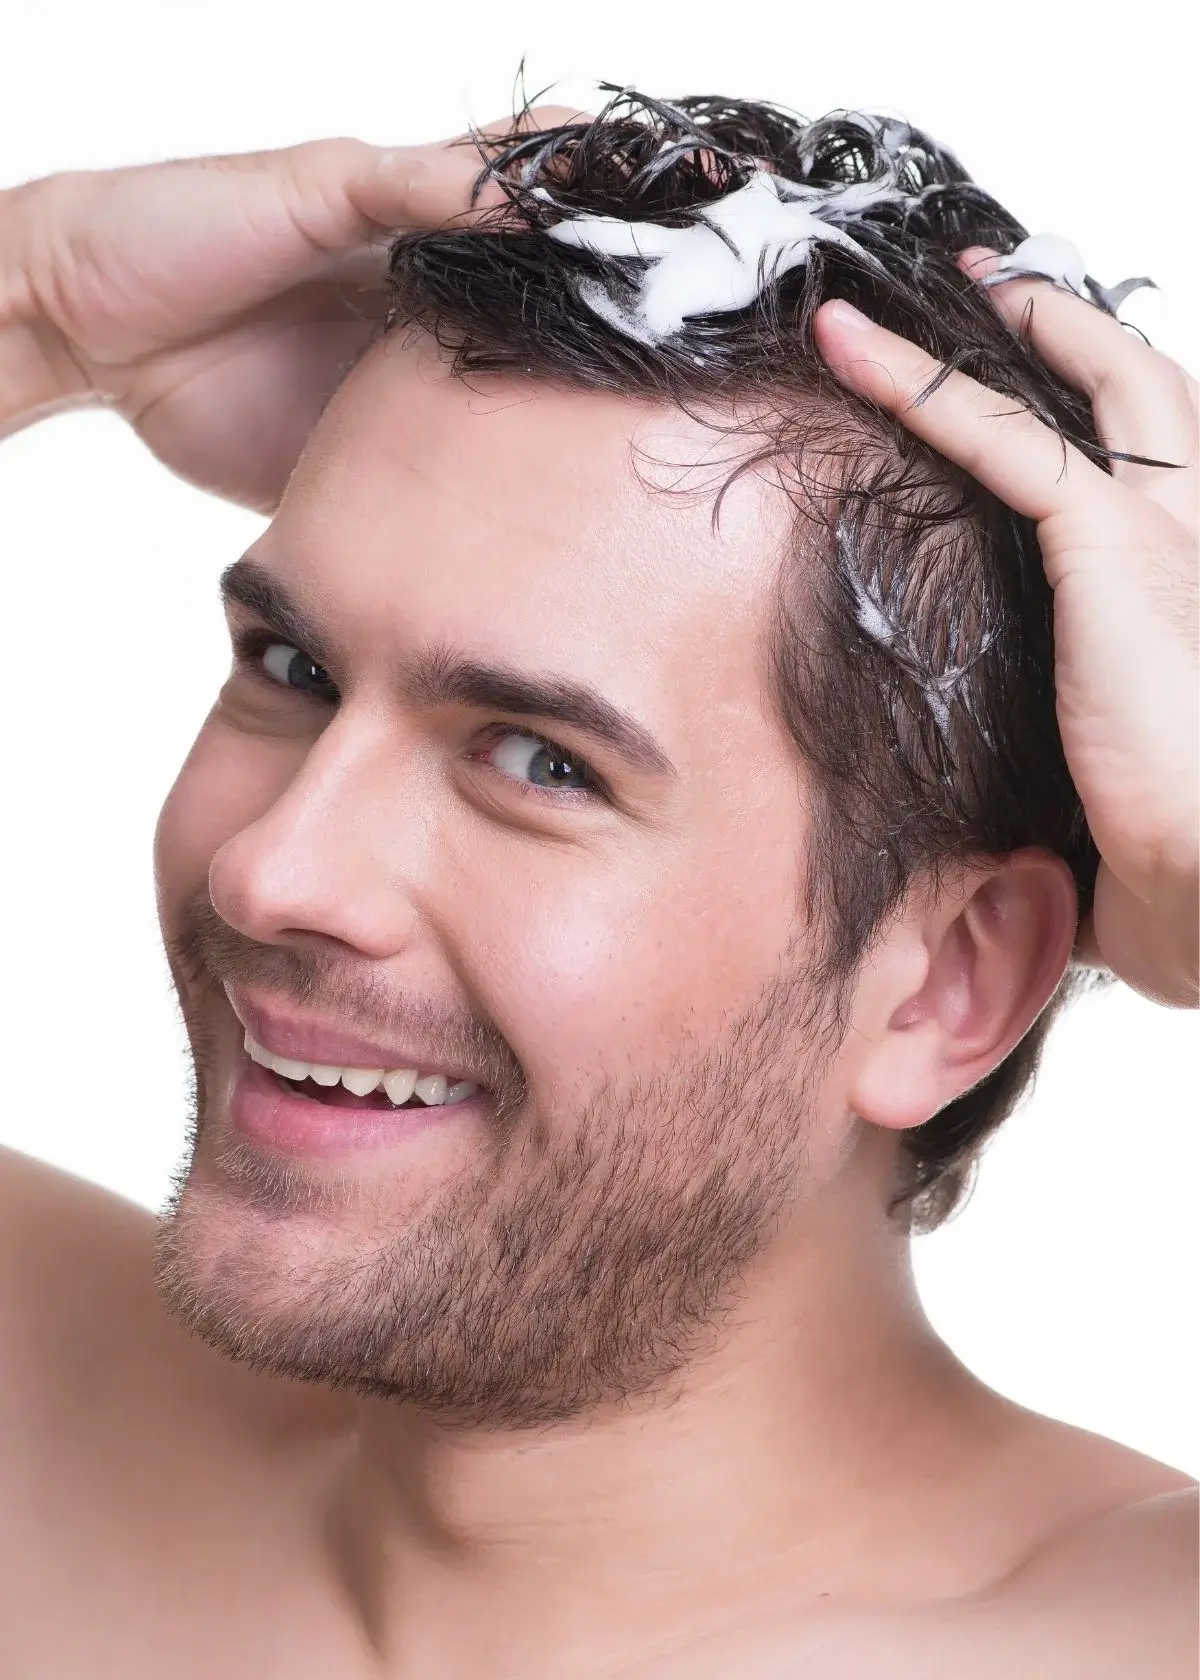 What ingredients should I look for in a shampoo for thinning hair for men?